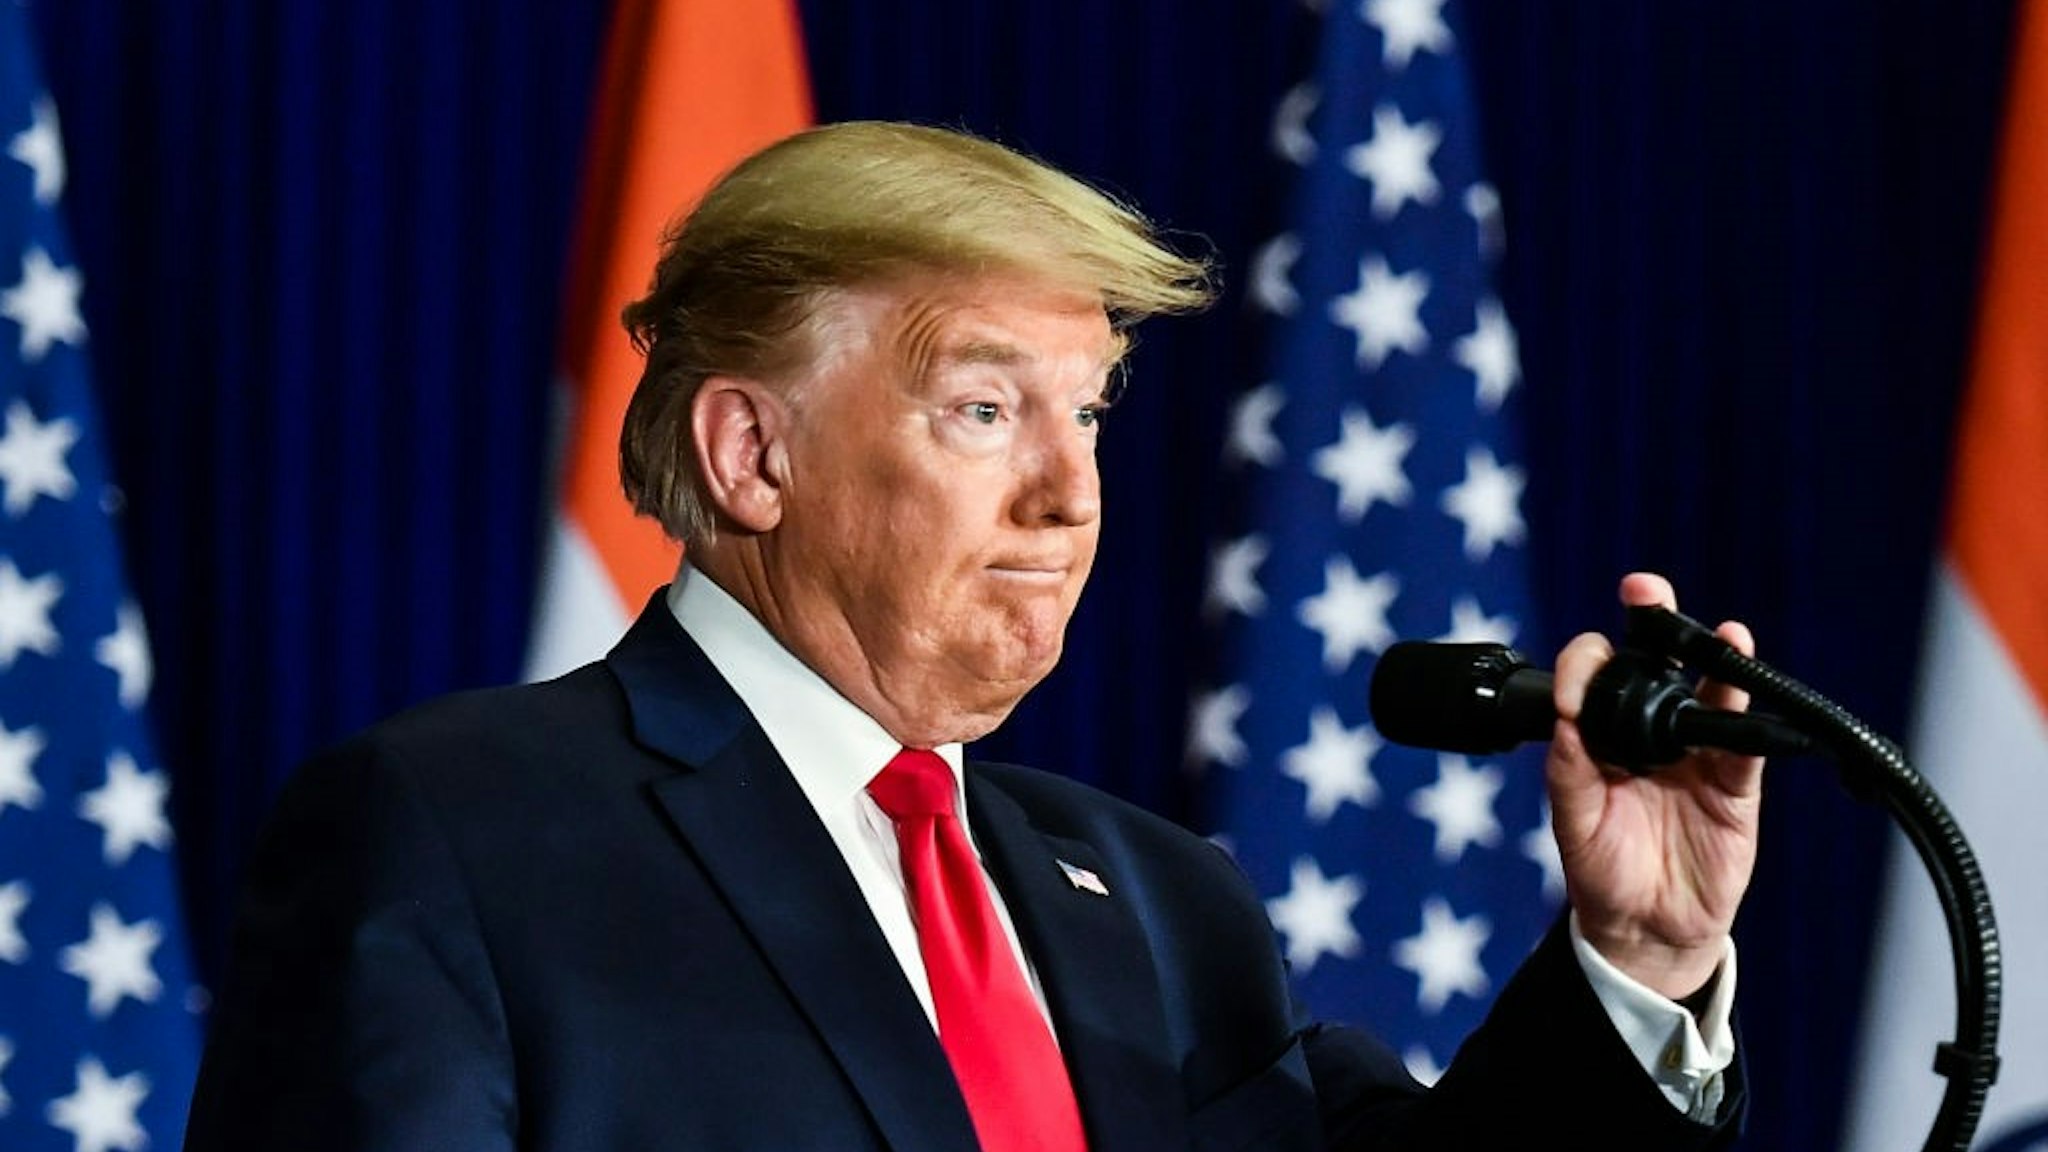 US President Donald Trump speaks during a press conference in New Delhi on February 25, 2020. (Photo by Mandel NGAN / AFP) (Photo by